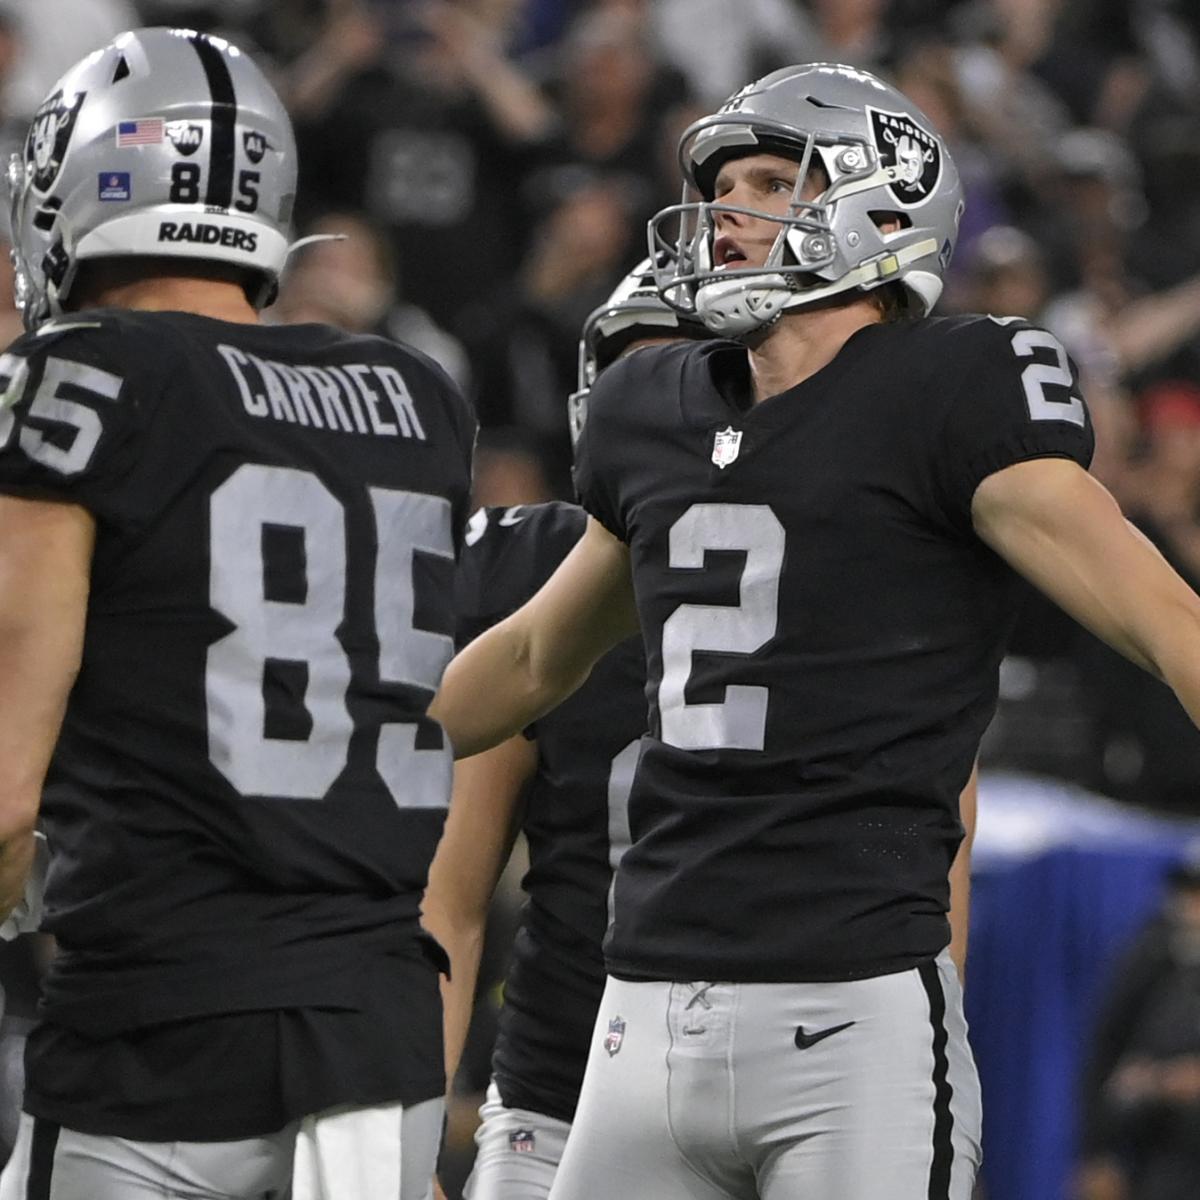 Steelers Fans Donate to Raiders K Daniel Carlson's Charities After GW FG vs. LAC